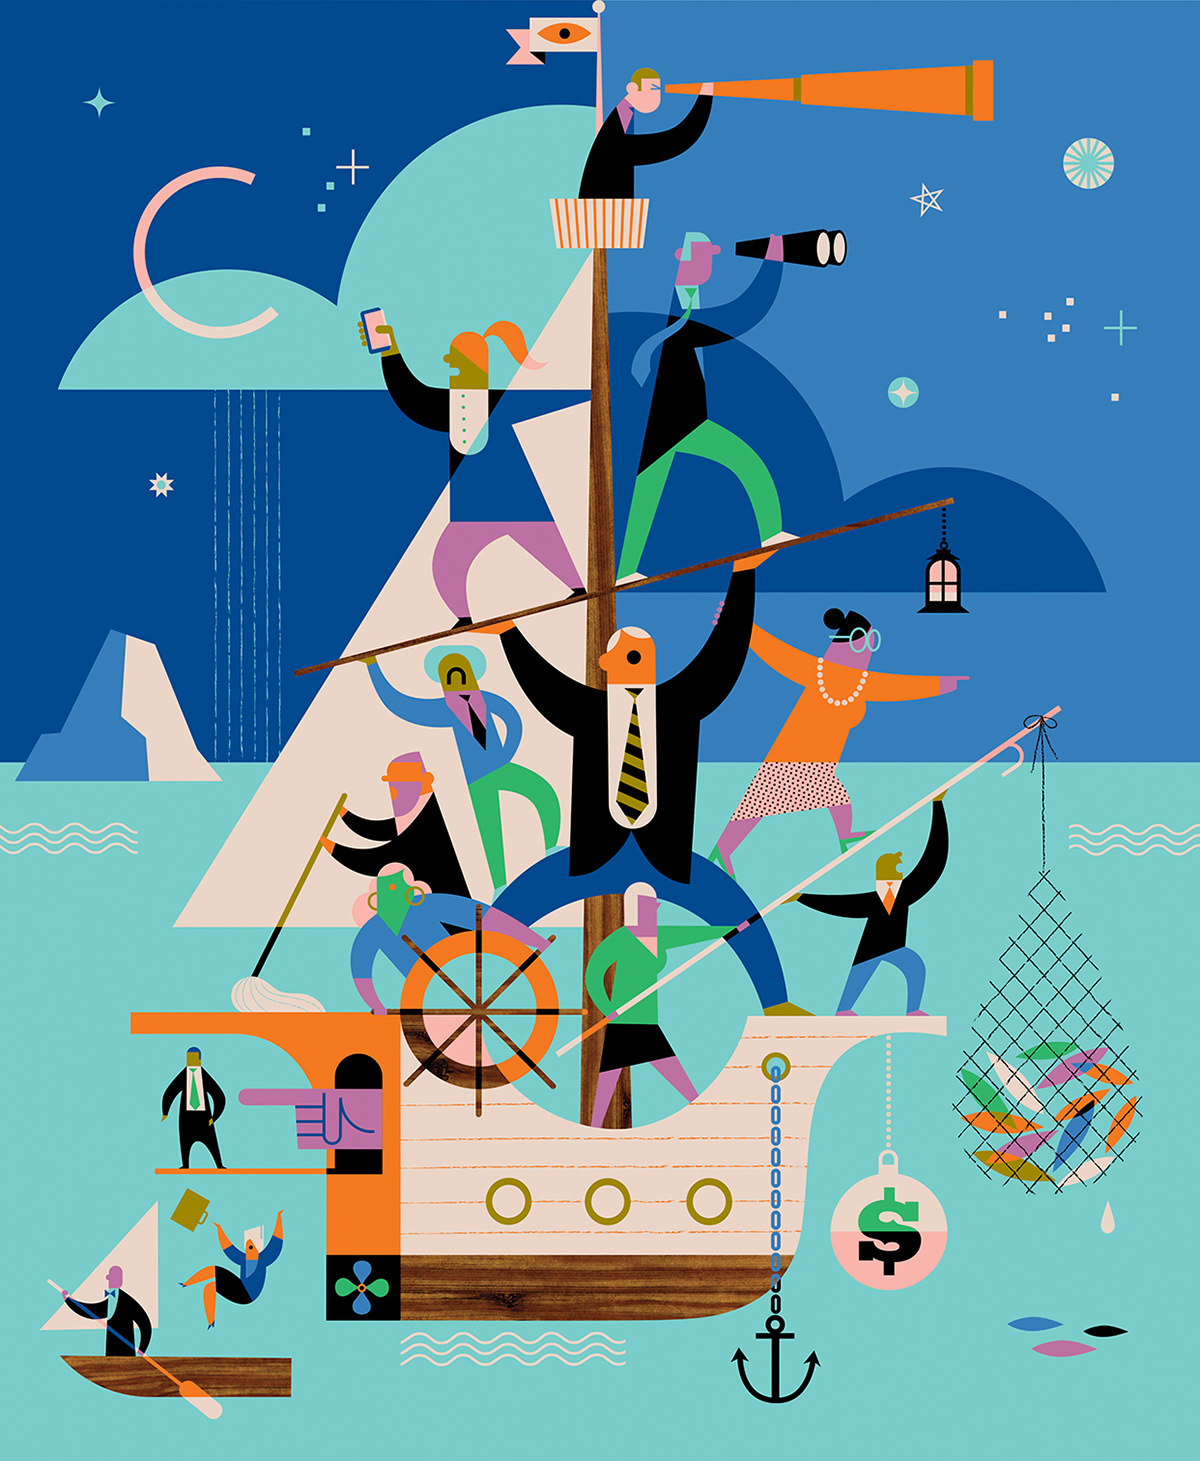 Harvard Business Review on Behance